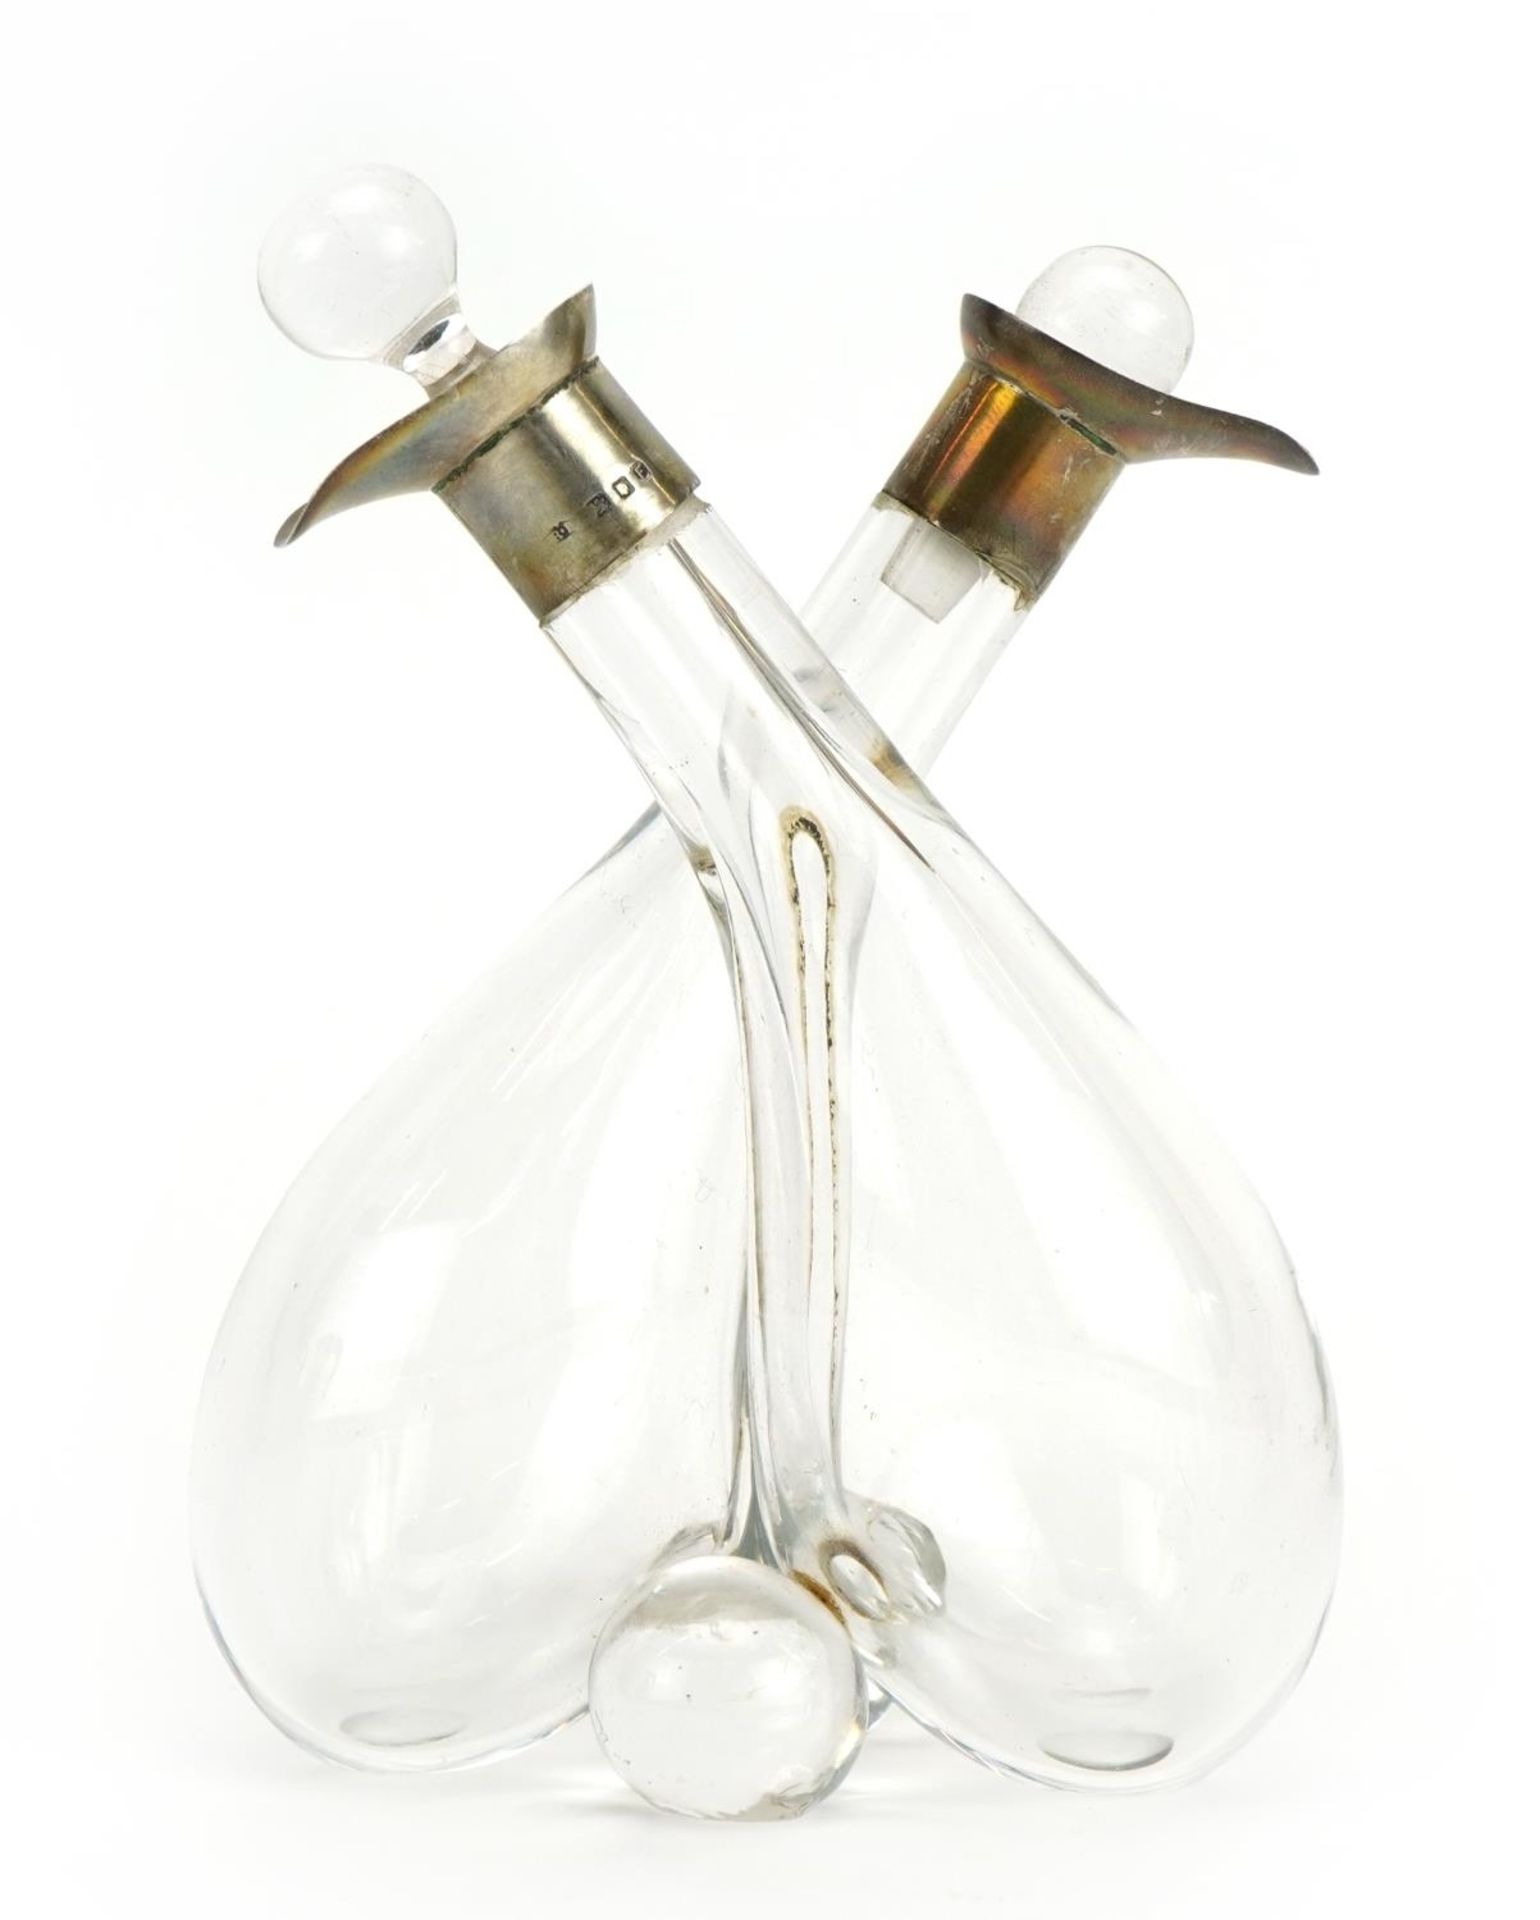 Robert Pringle & Sons, George VI silver mounted glass oil and vinegar bottle, London 1941, 13cm high - Image 2 of 4